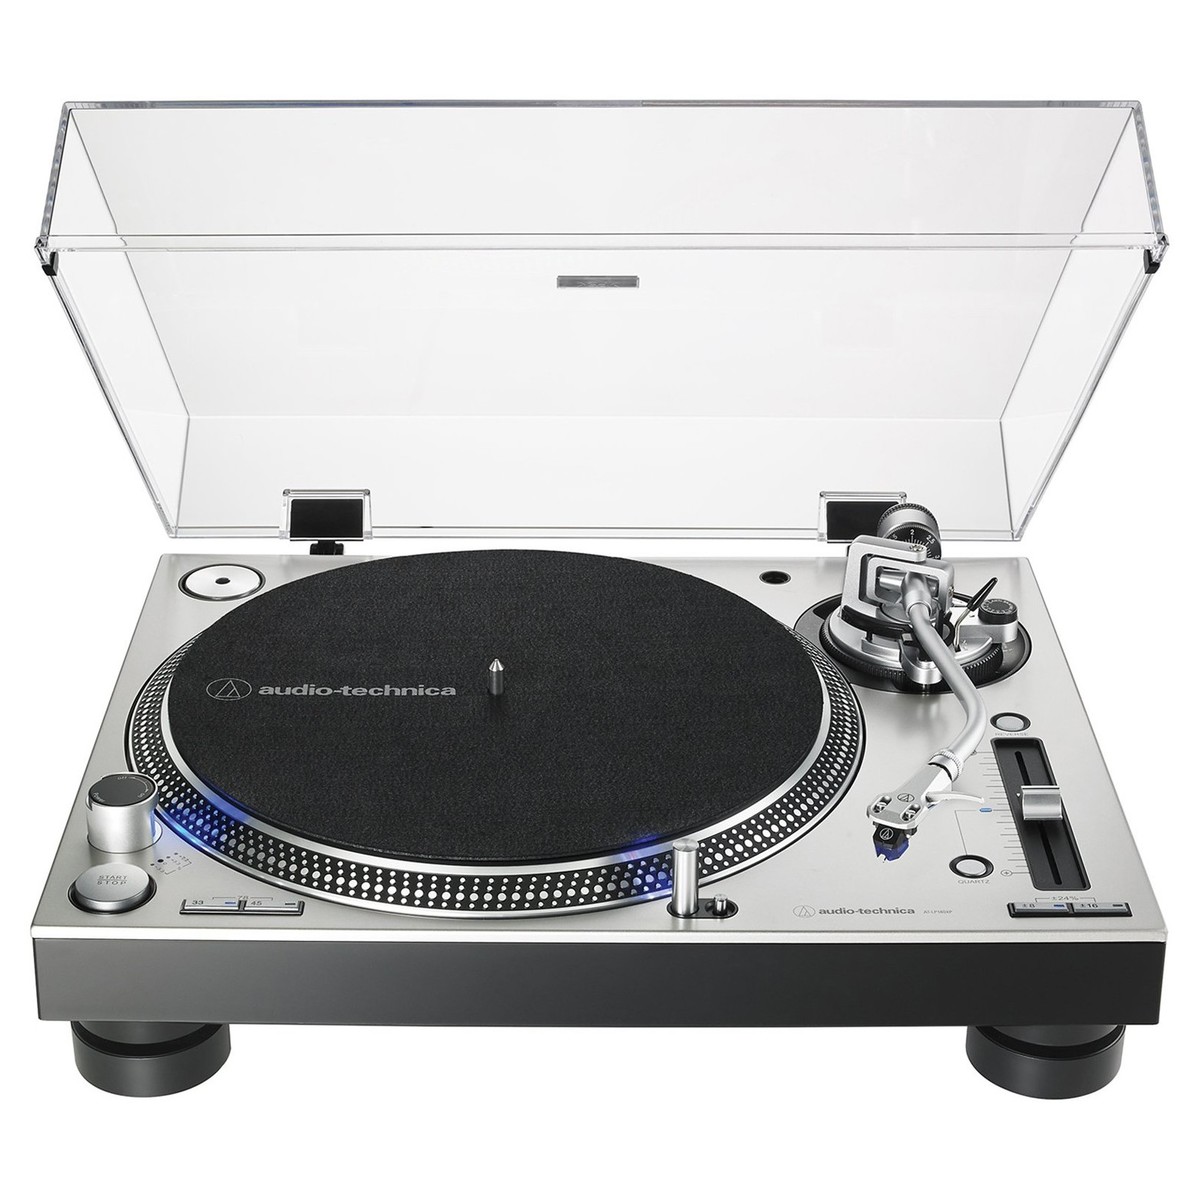 Audio Technica AT-LP140XPSVEUK Professional Direct Drive Manual Turntable Silver